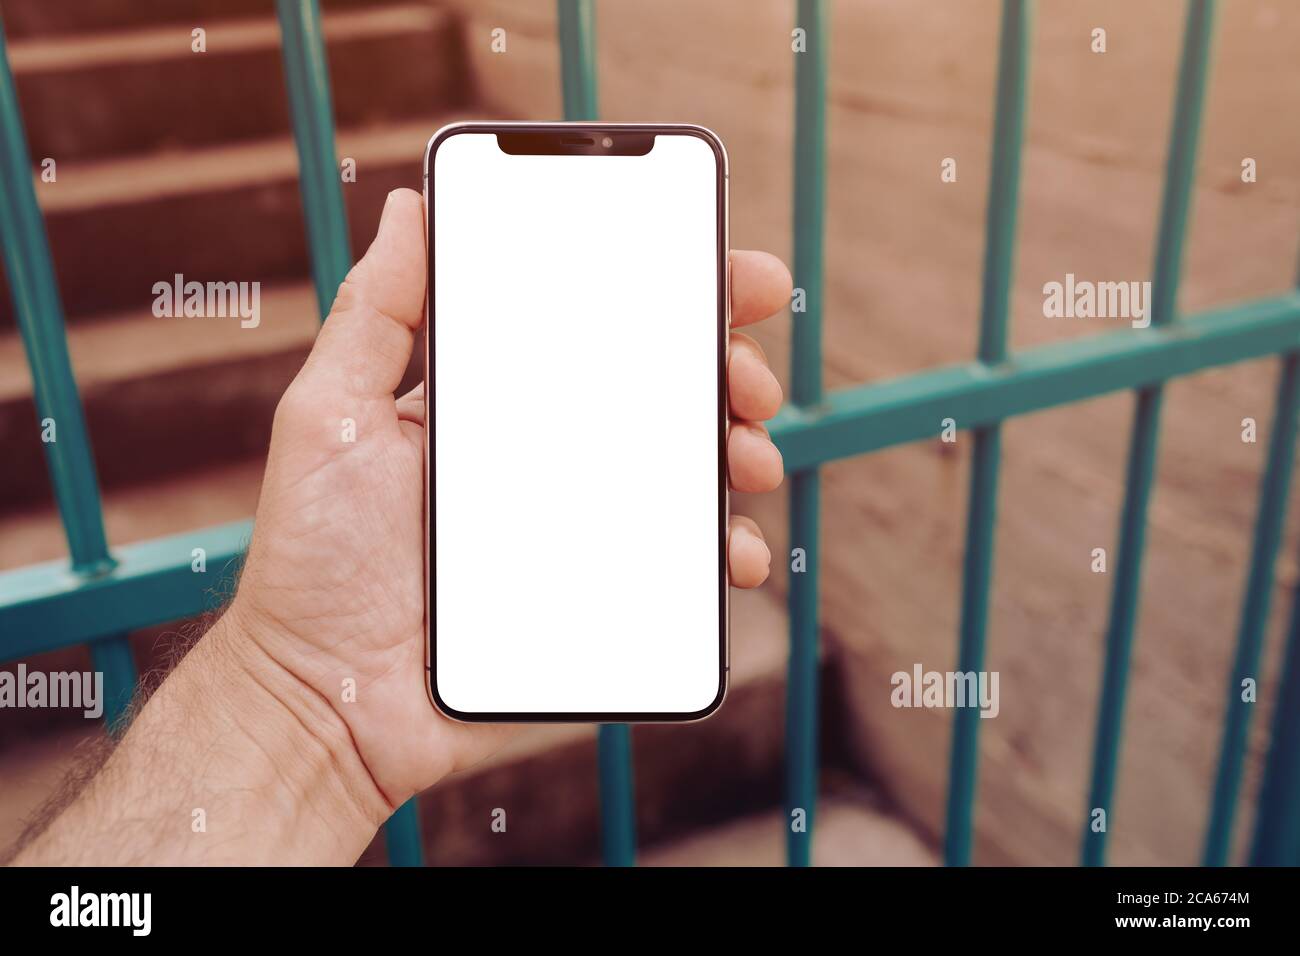 Mockup of smartphone screen on the street in urban surrounding, man holding modern smart phone with blank display as copy space Stock Photo